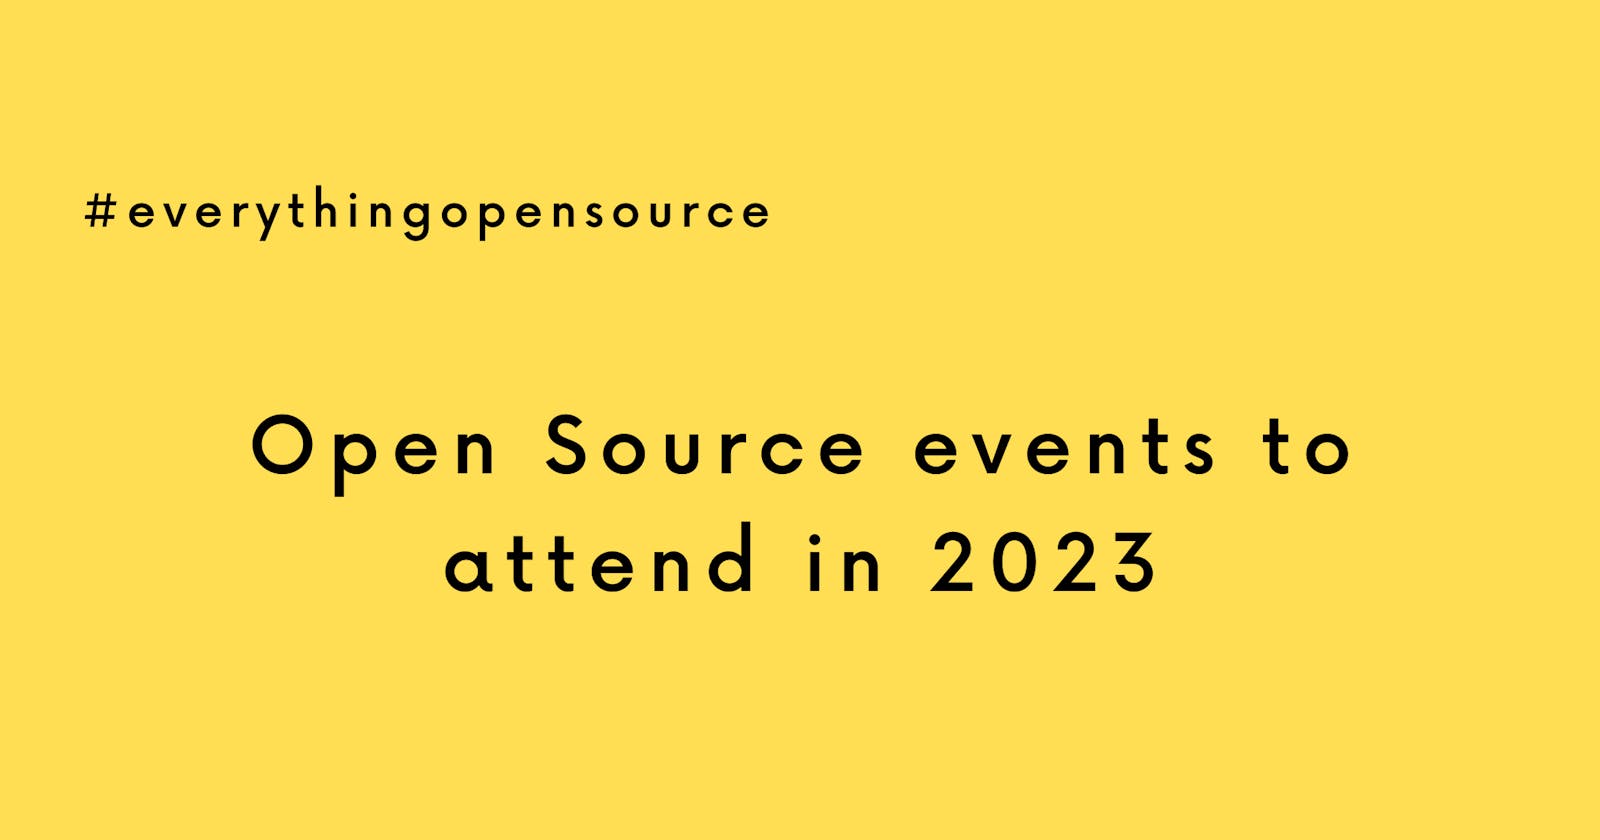 Open Source events to attend in 2023